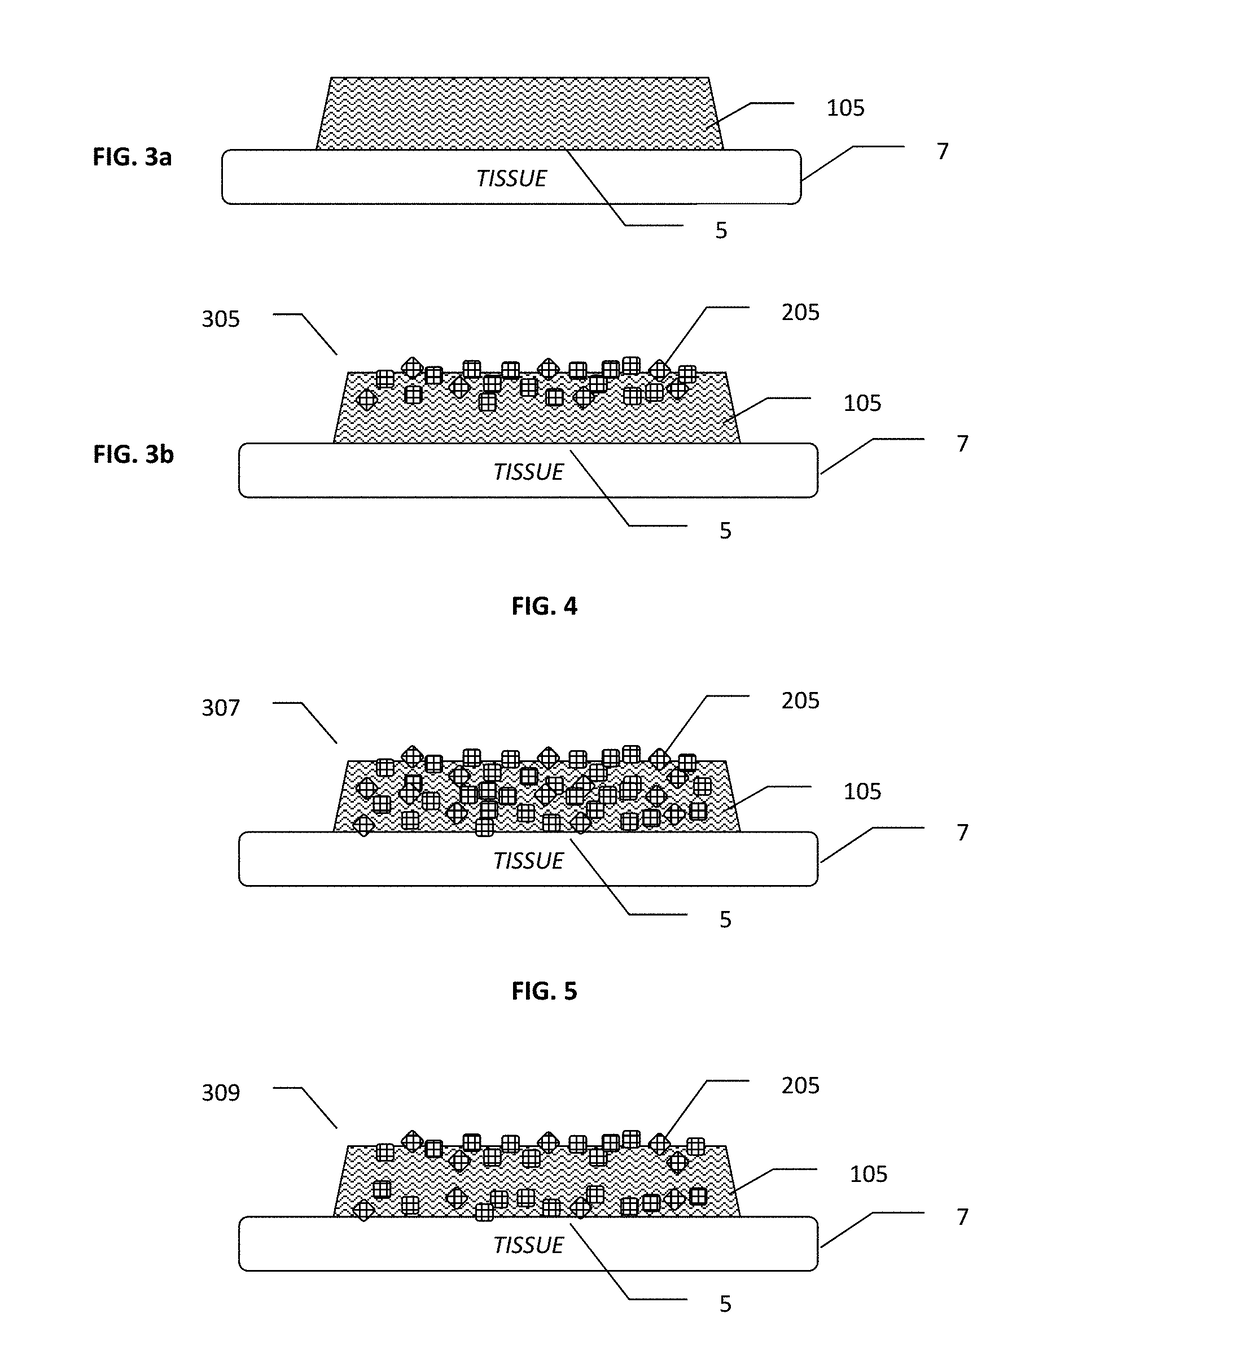 Methods and devices for co-delivery of liquid and powdered hemostats and sealants